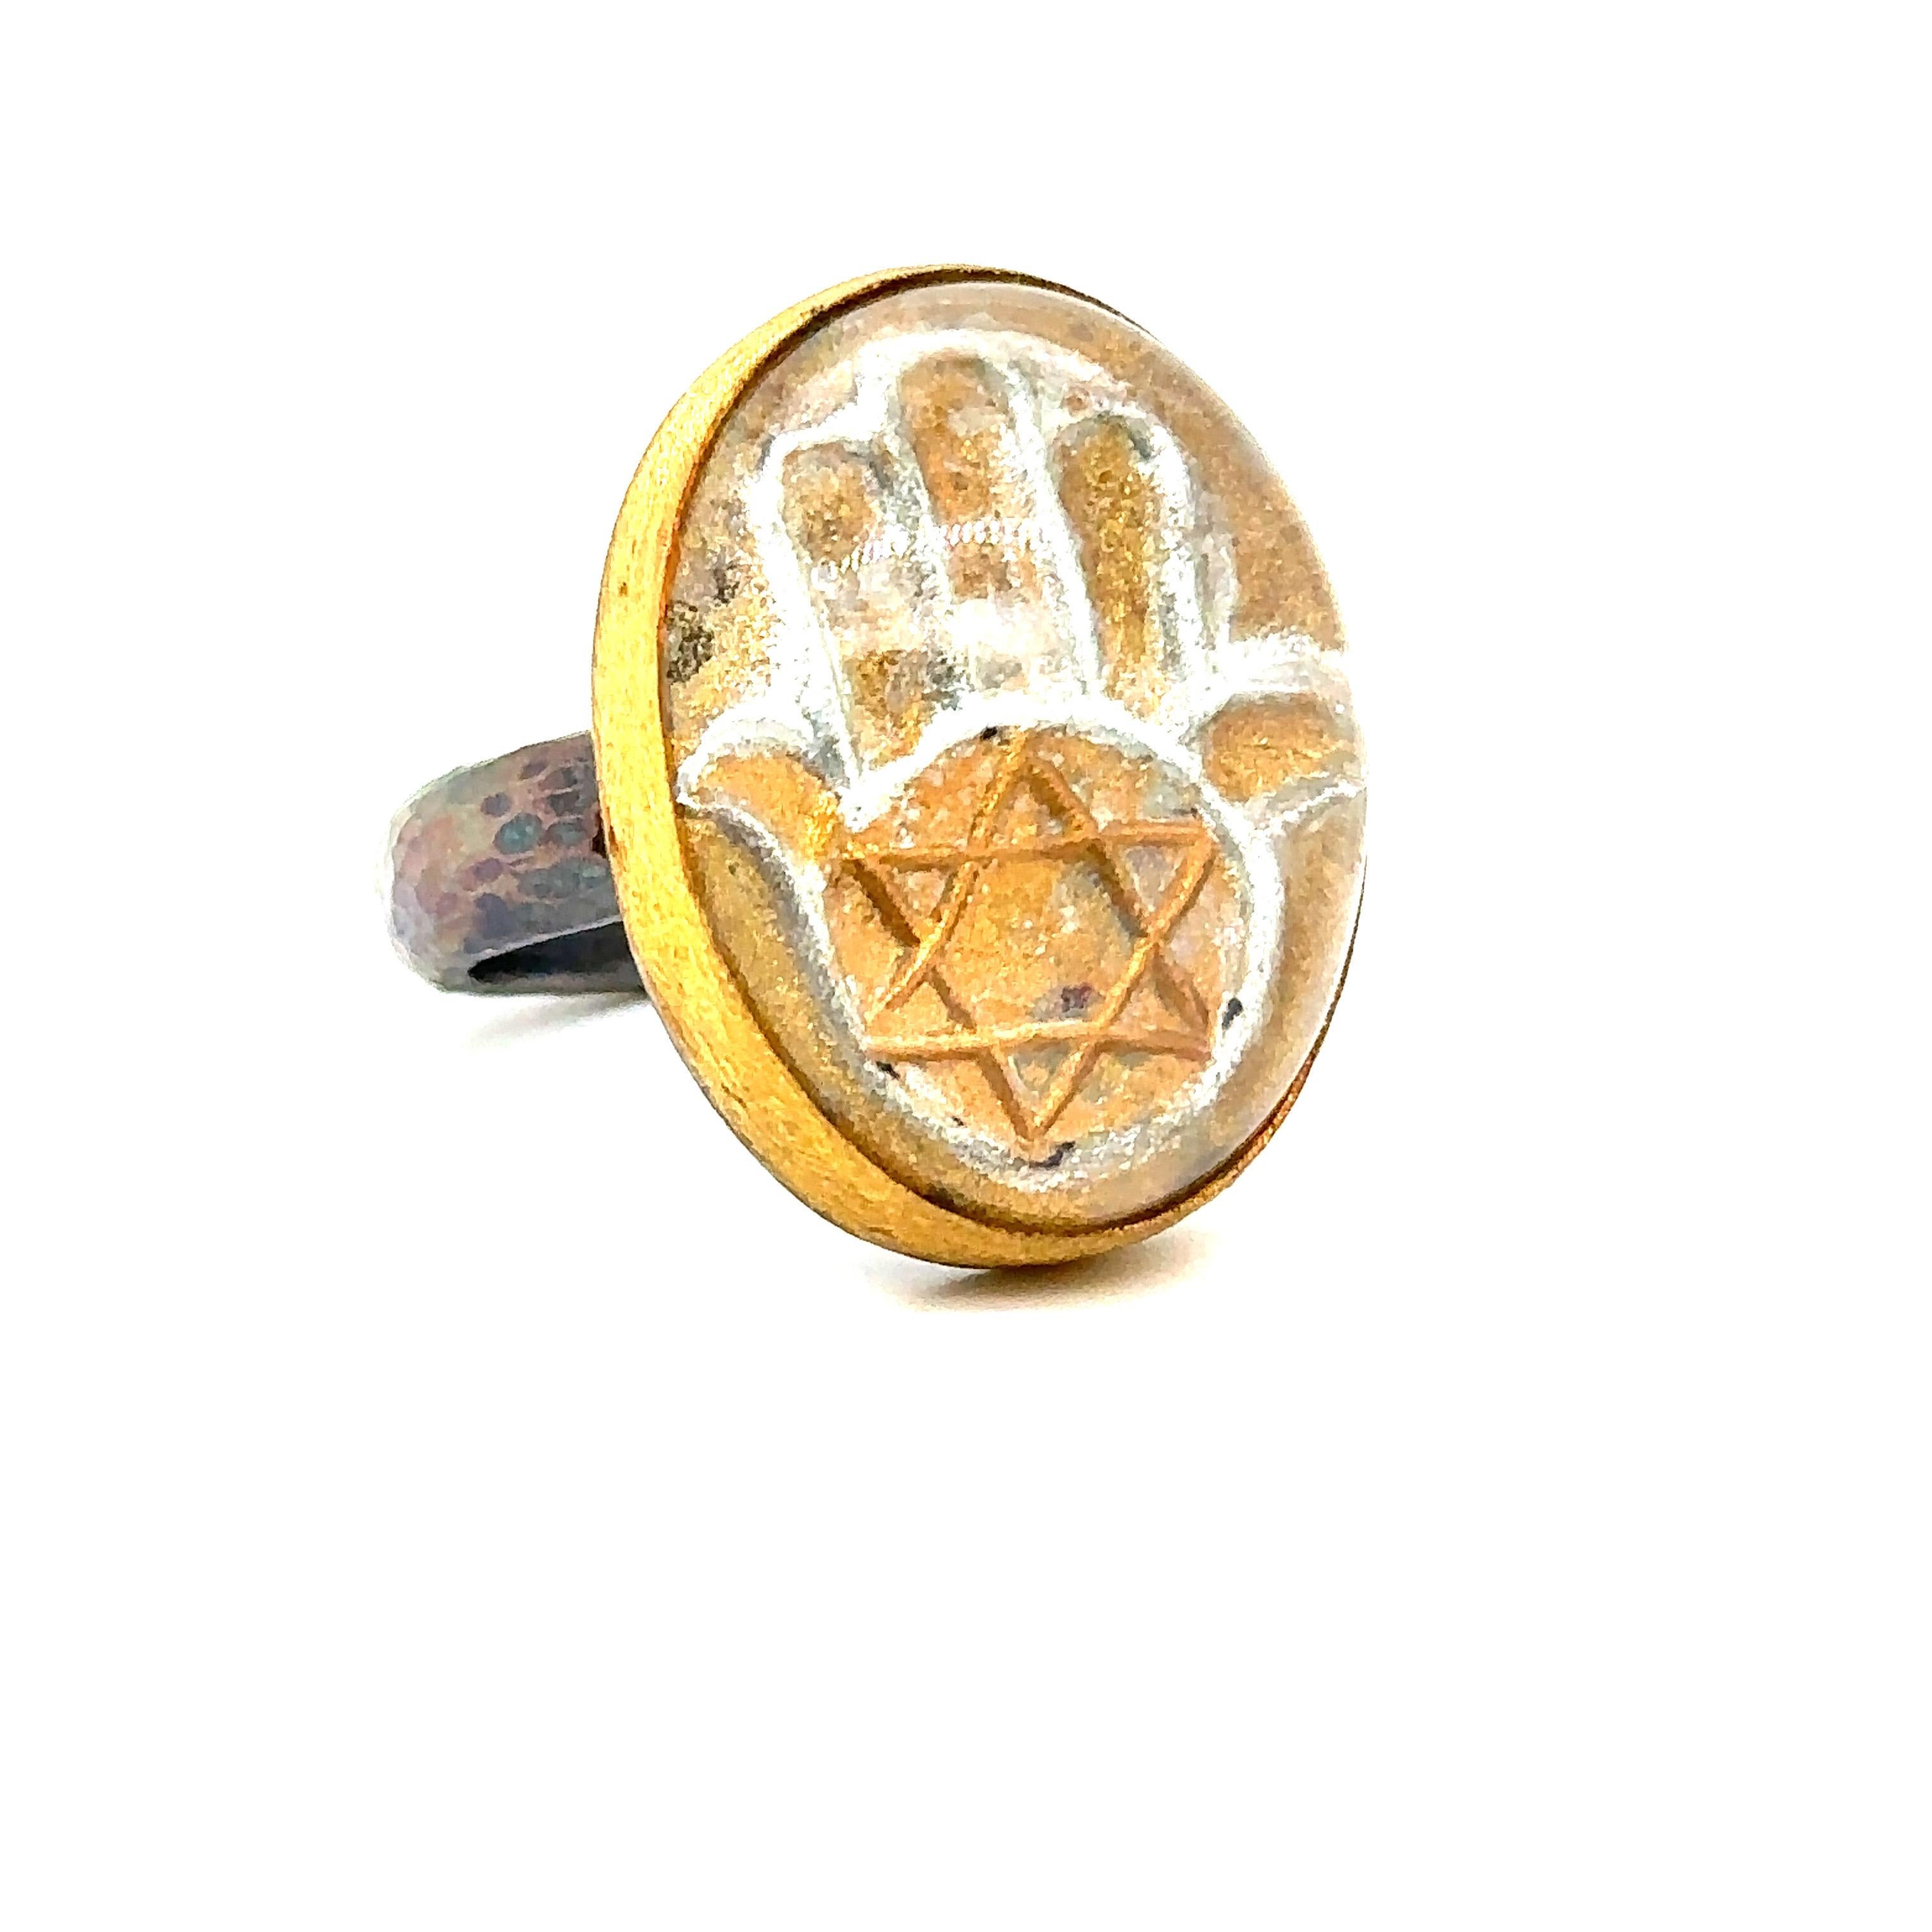 24K GOLD/STERLING SILVER HAMSA RING with 30.00CT CARVED QUARTZ 
Metal: 24K GOLD/SS
Stone Info: 30.00CT CARVED QUARTZ
Total Stone Weight: 30.0 cwt.
Item Weight:  16.80 gm
Ring Size: 8 (Re-sizable)
Measurements: 28.80mm x 20.75mm
